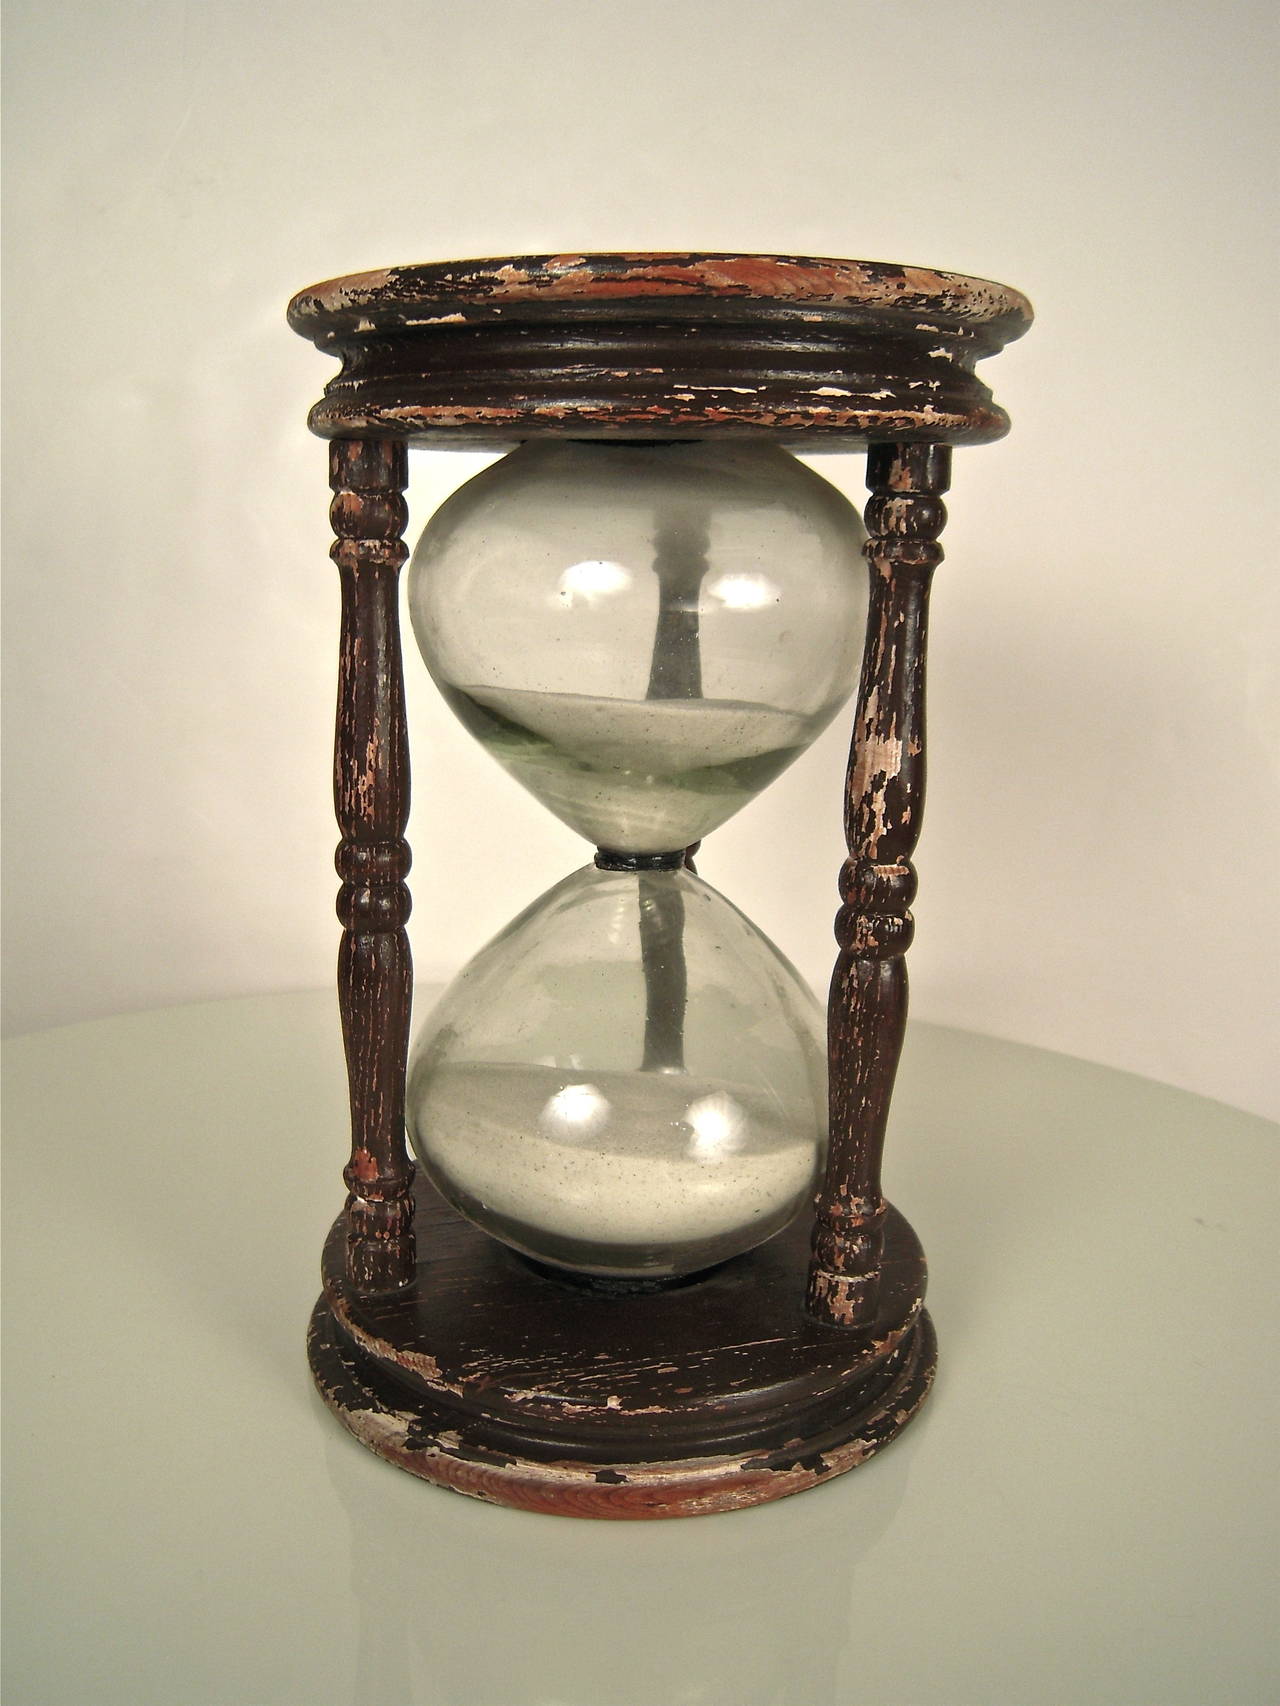 A large 19th century hour glass, or sand glass, with brown painted ring-turned end plates connected by three baluster- turned columns, encasing a large colorless glass bulb with white sand.

Height: 12 3/4